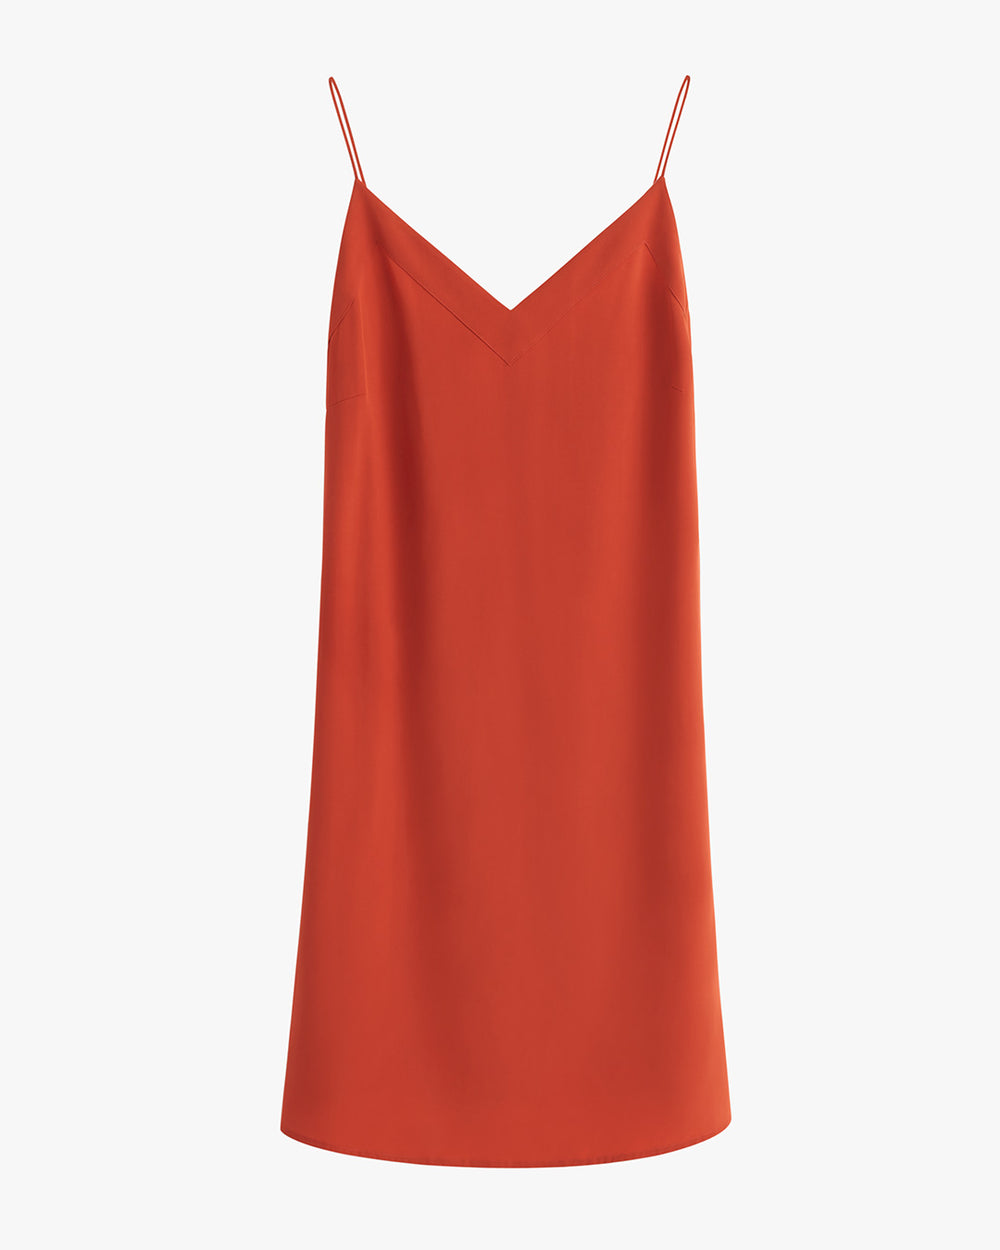 Sleeveless dress with V-neckline and thin straps, displayed on plain background.